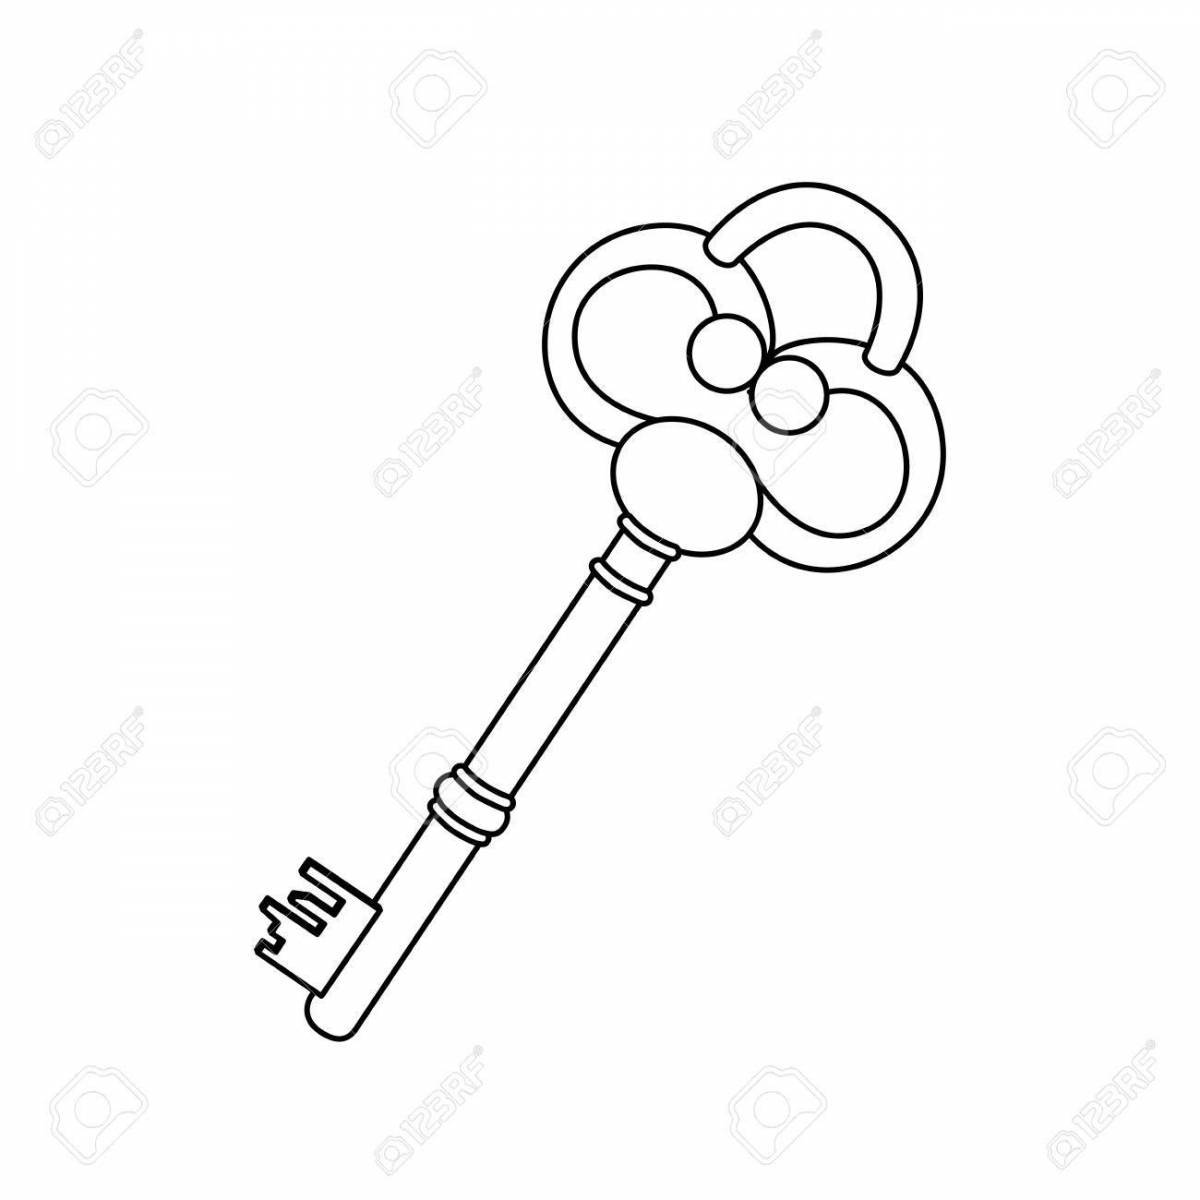 Colorful golden key coloring page